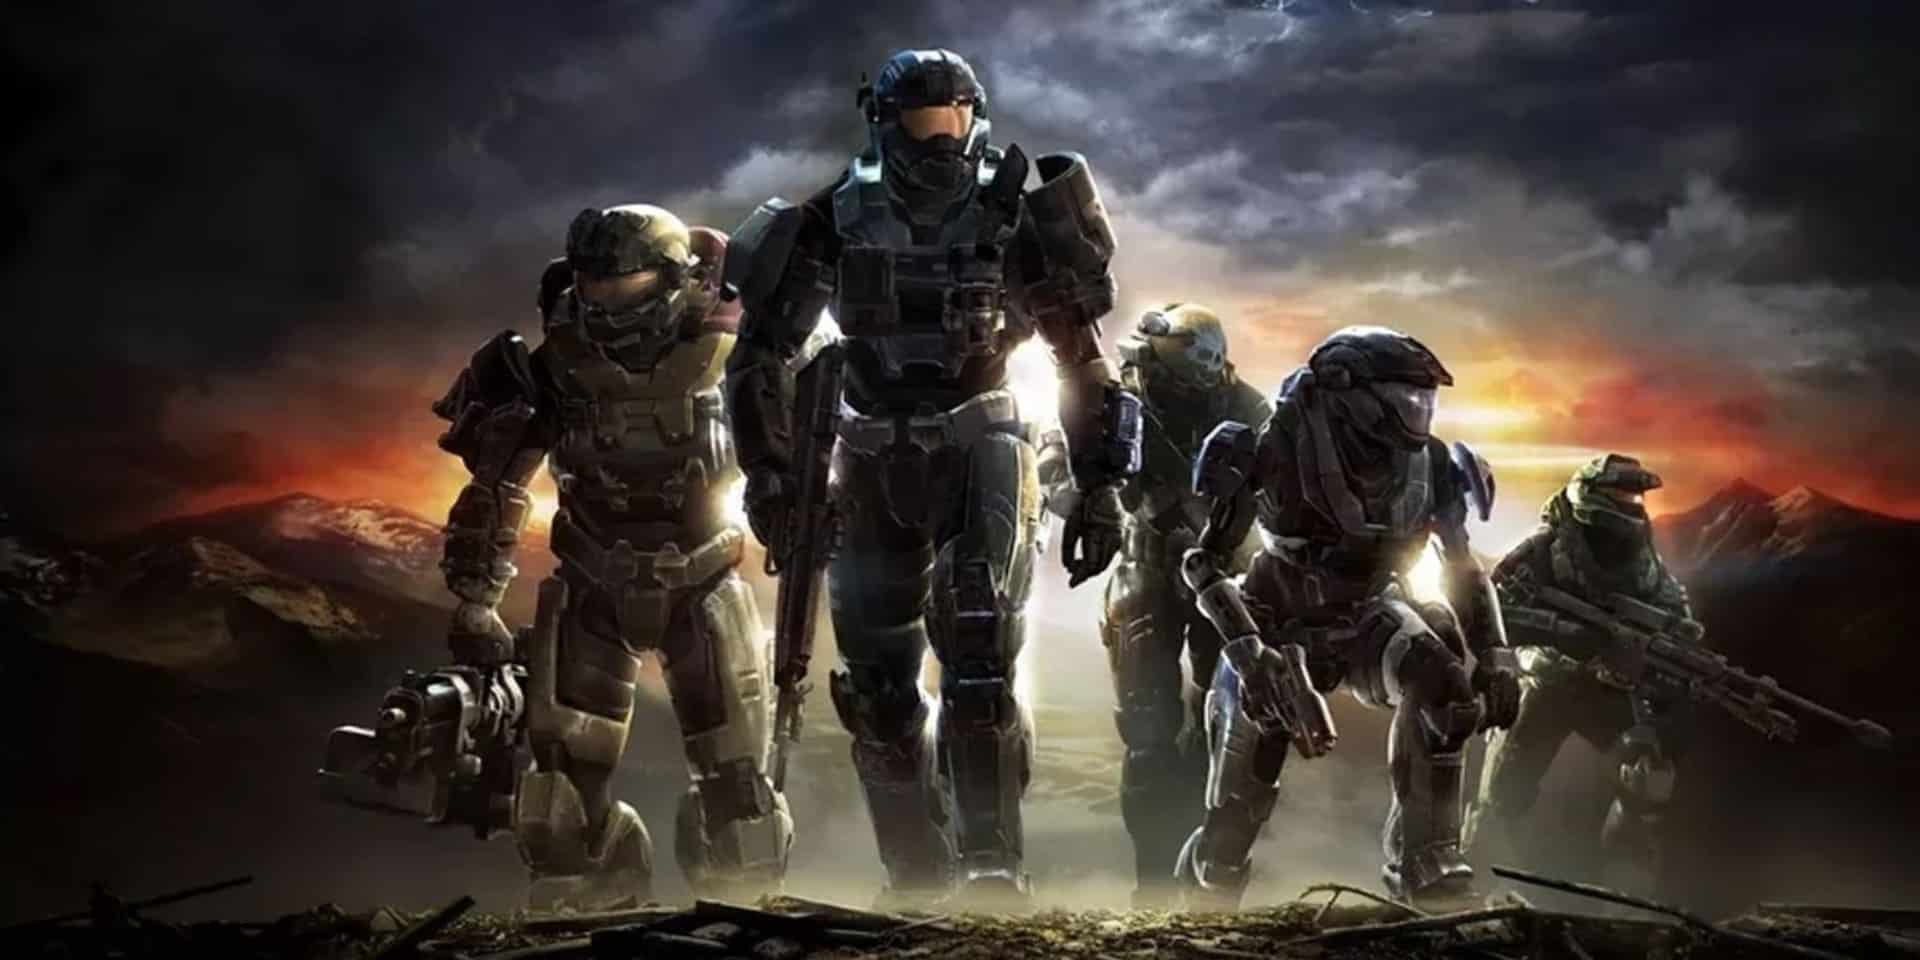 Halo-Infinite-UNSC-Marine-Funny-Quotes-3-GamersRD (1)